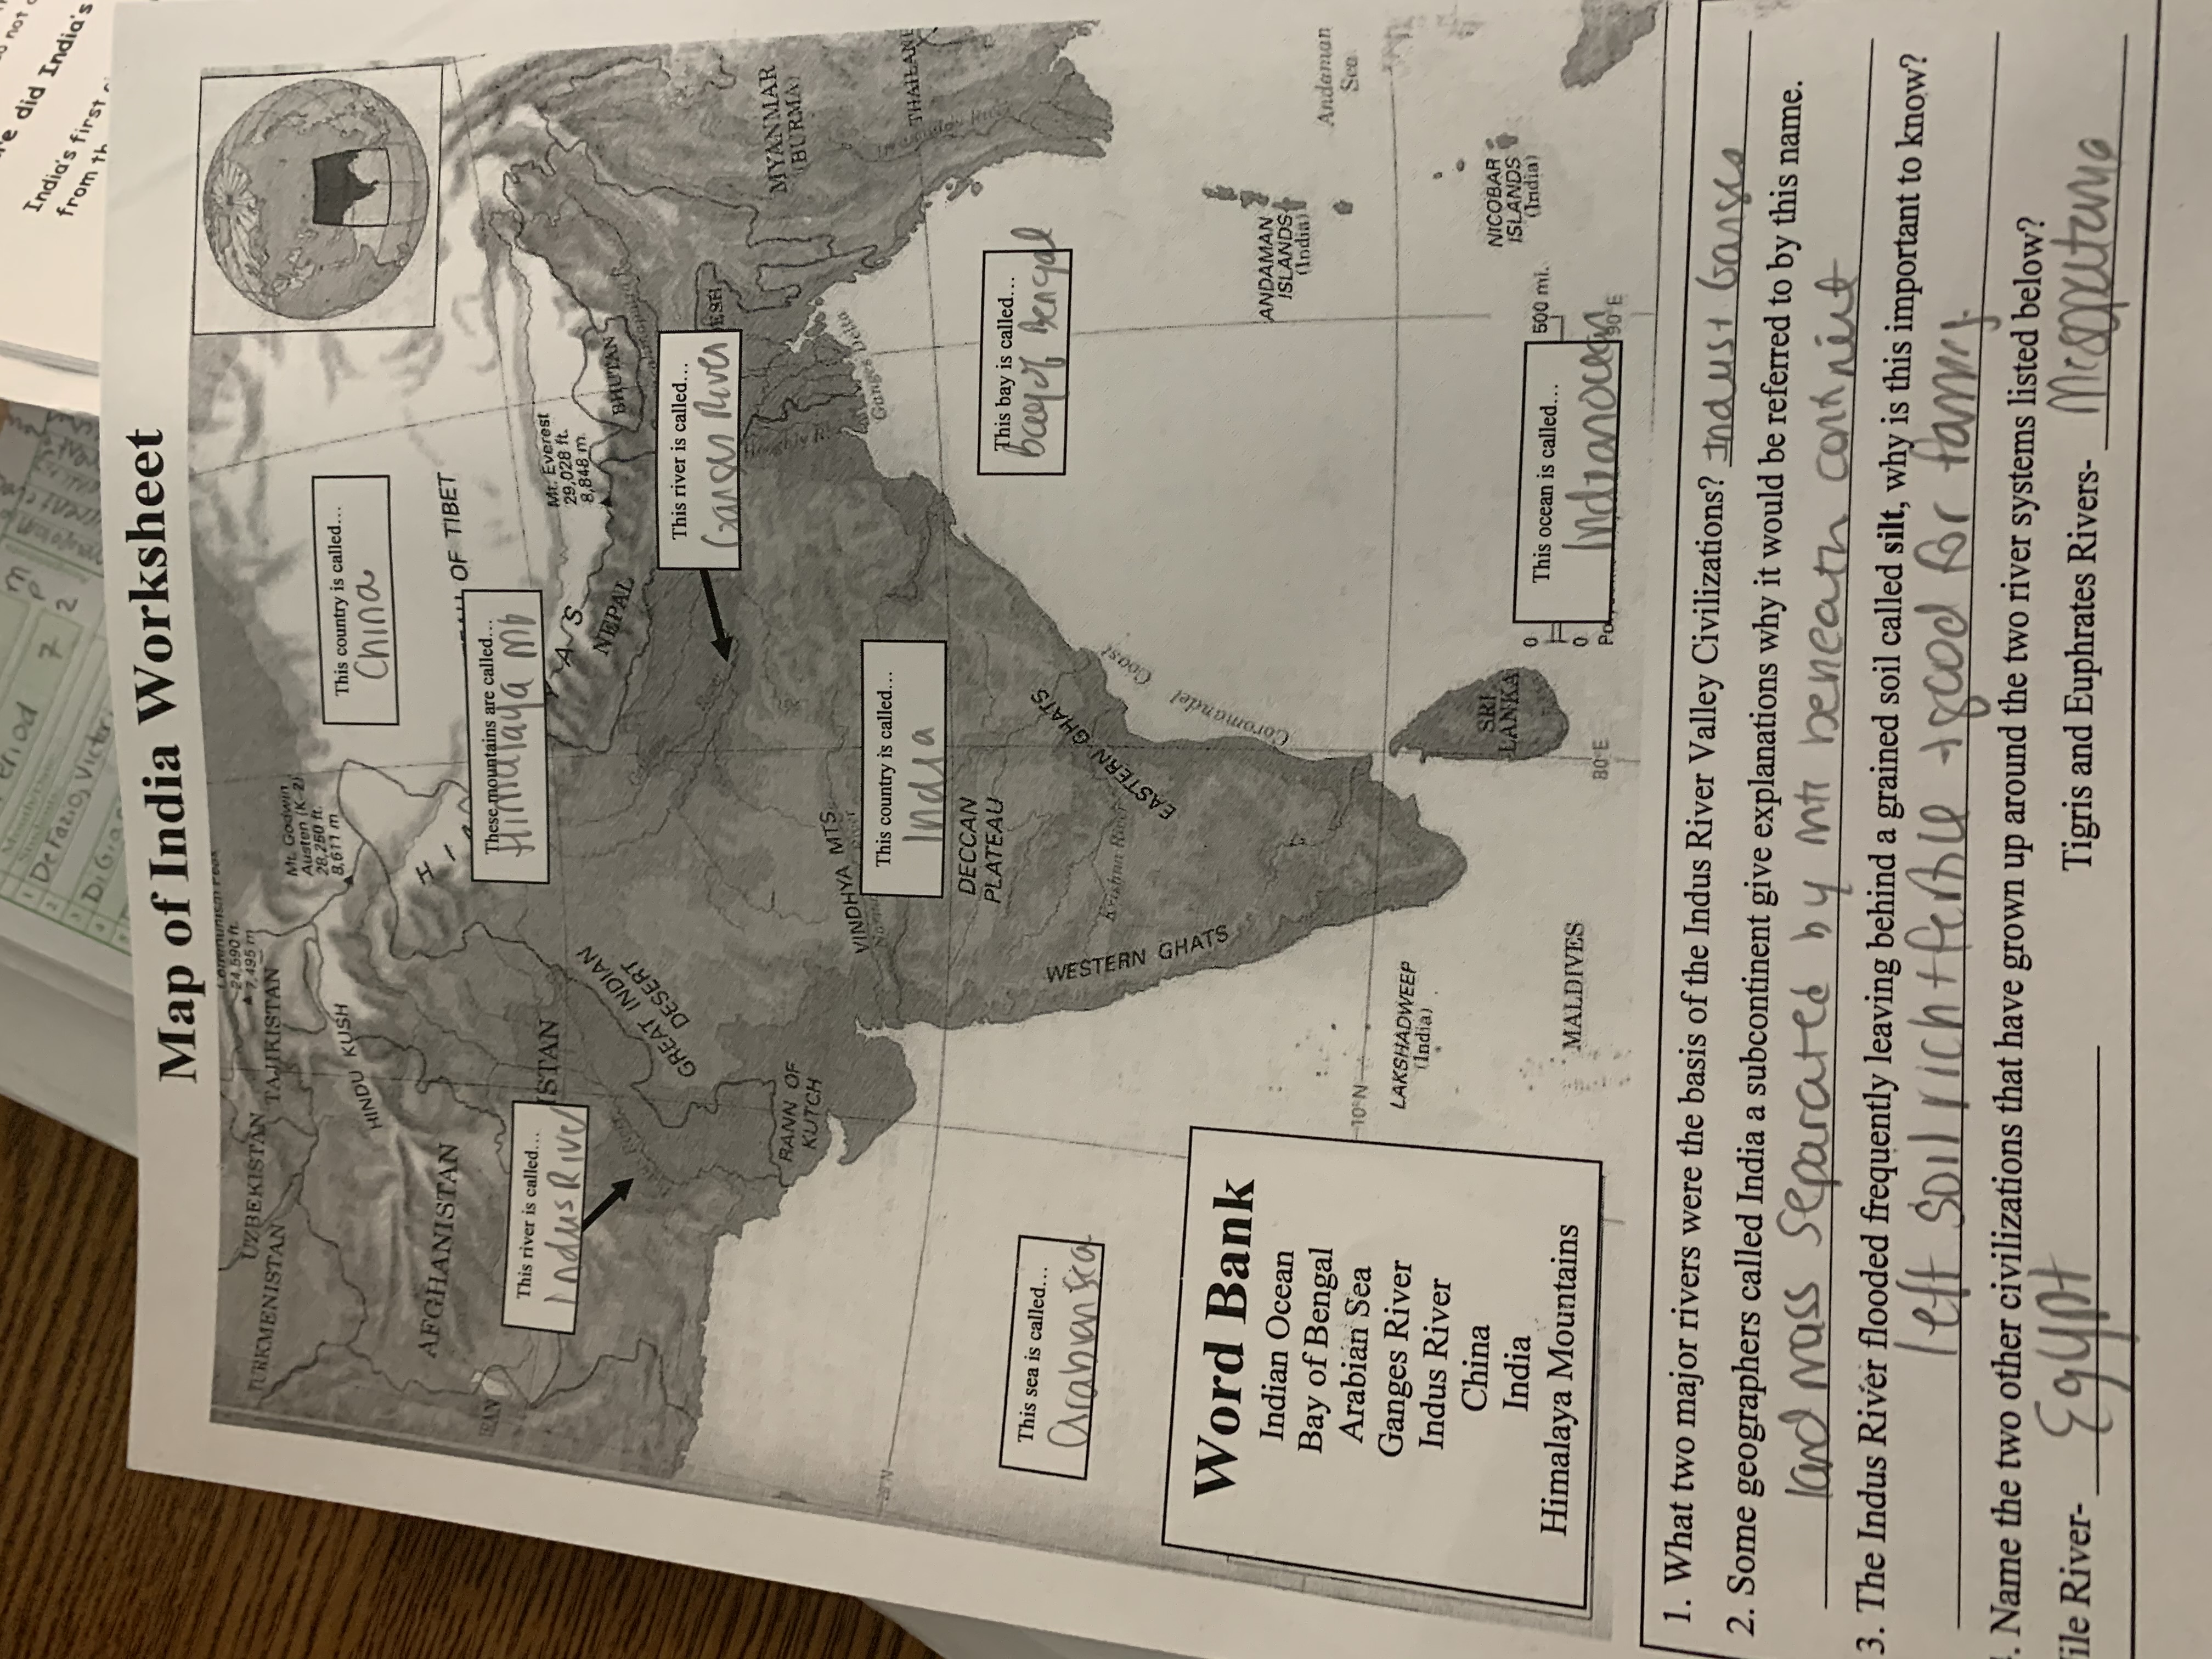 Global History 22 With Regard To River Valley Civilizations Worksheet Answers